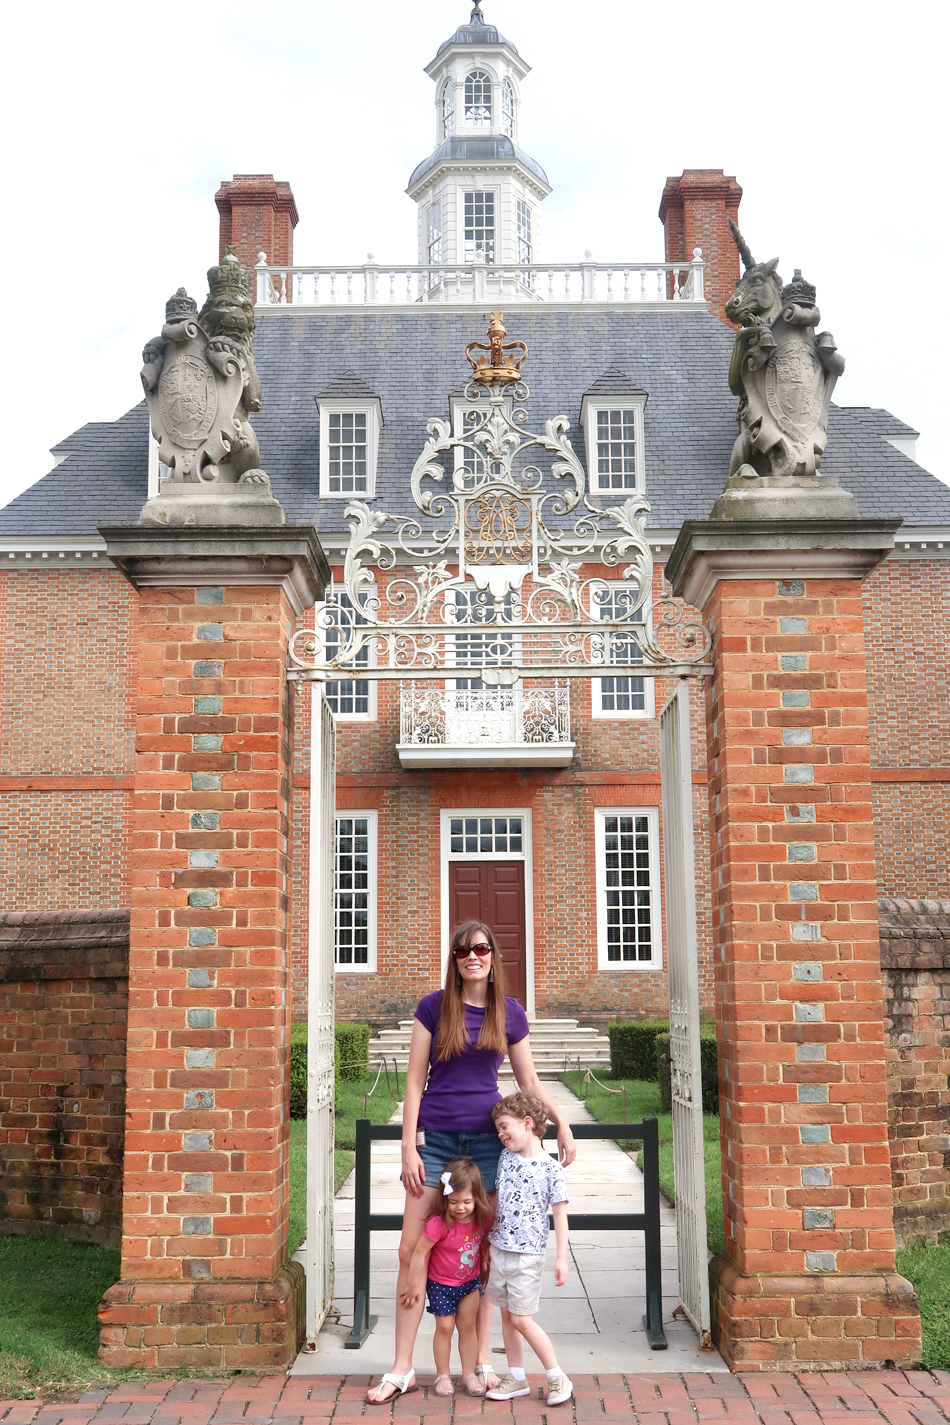 Colonial Williamsburg review